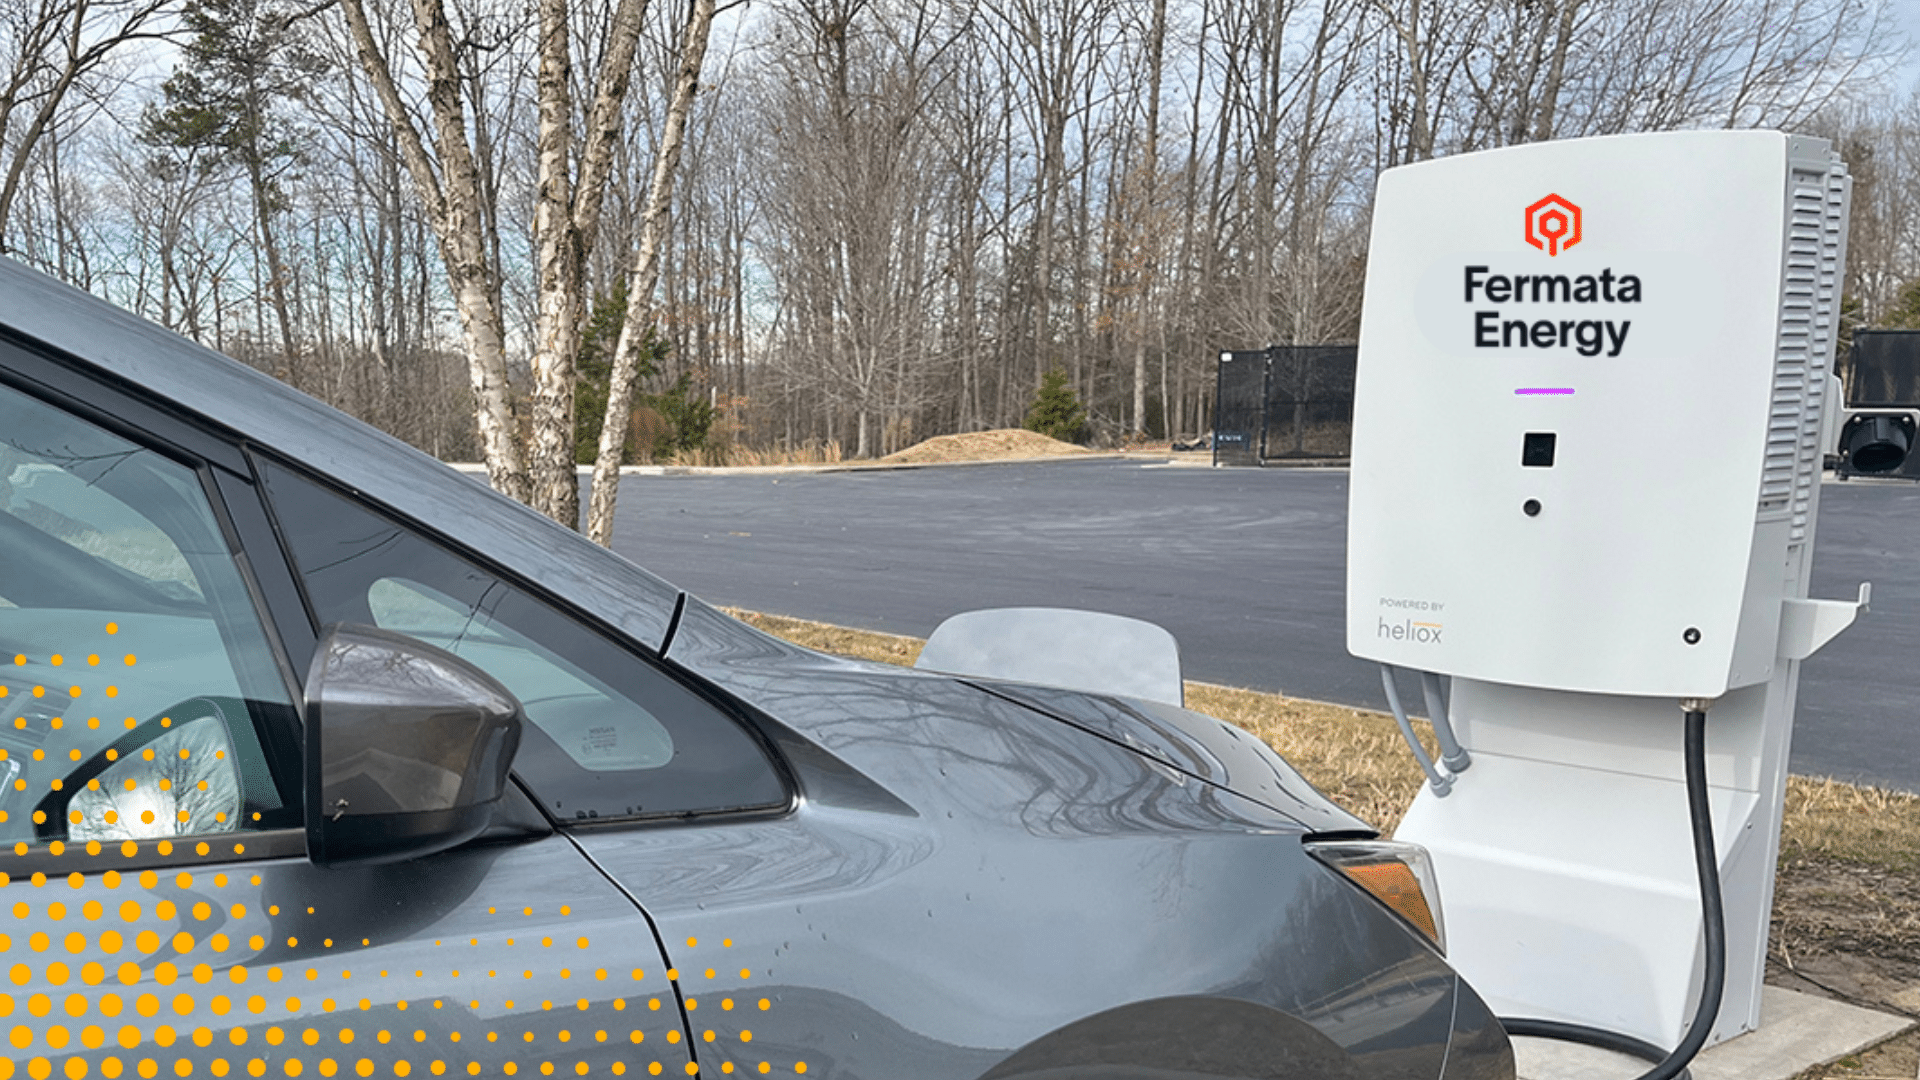 Fermata Energy charger plugged in to fleet vehicle